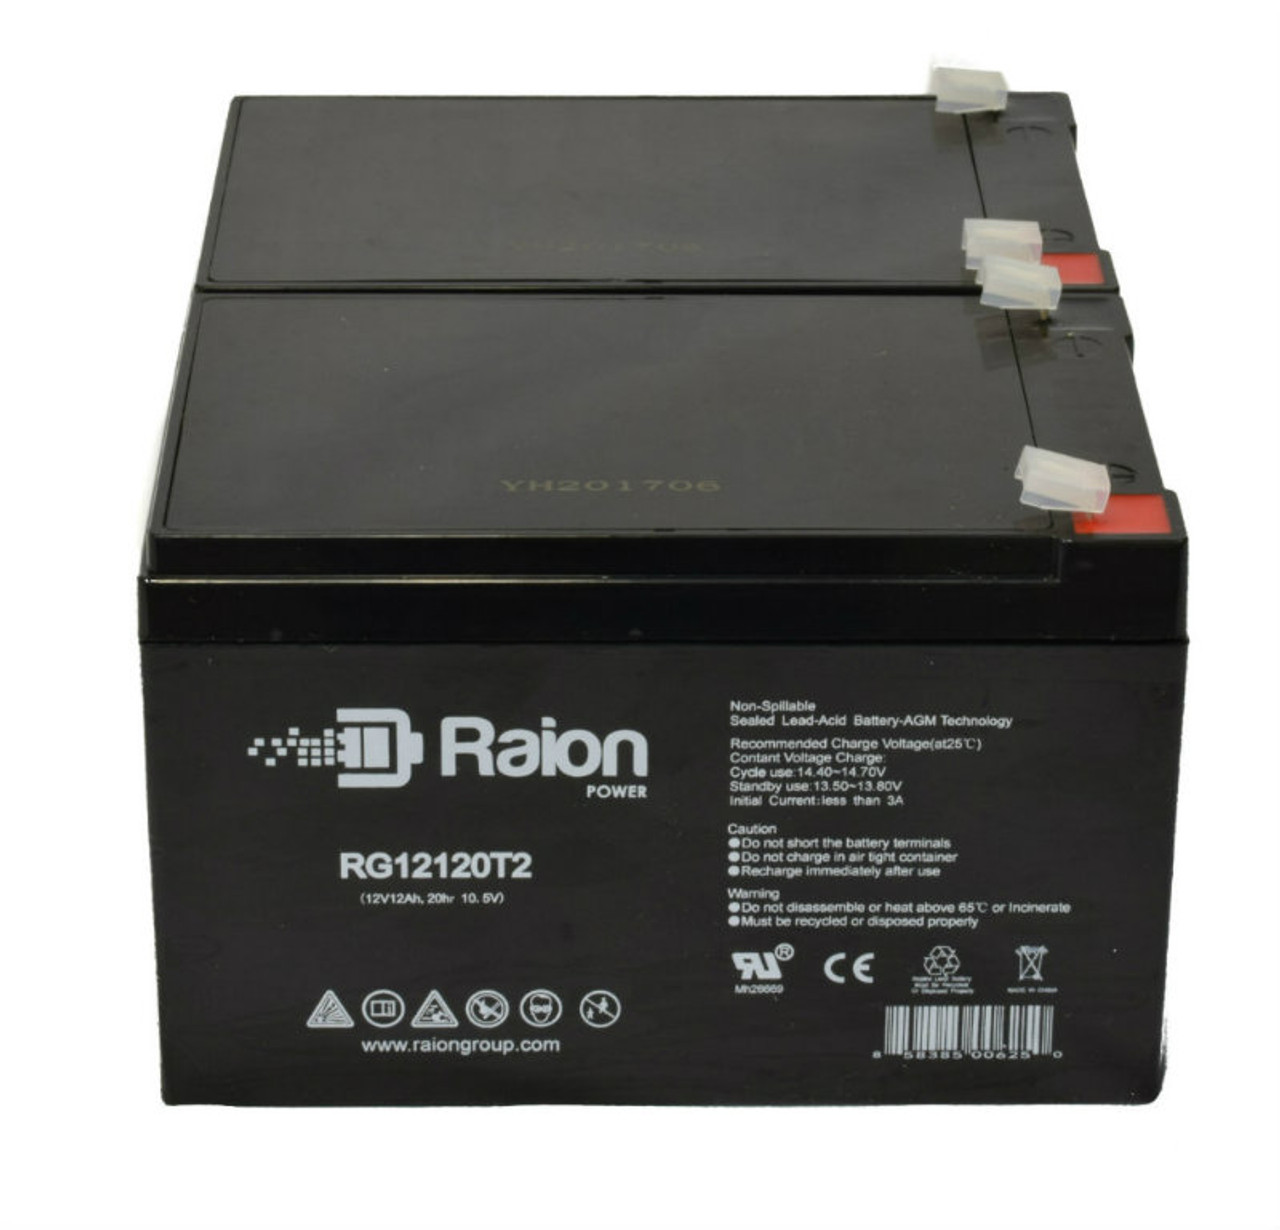 Raion Power RG12120T2 Replacement Emergency Light Battery for IBT BT12-12 - 2 Pack